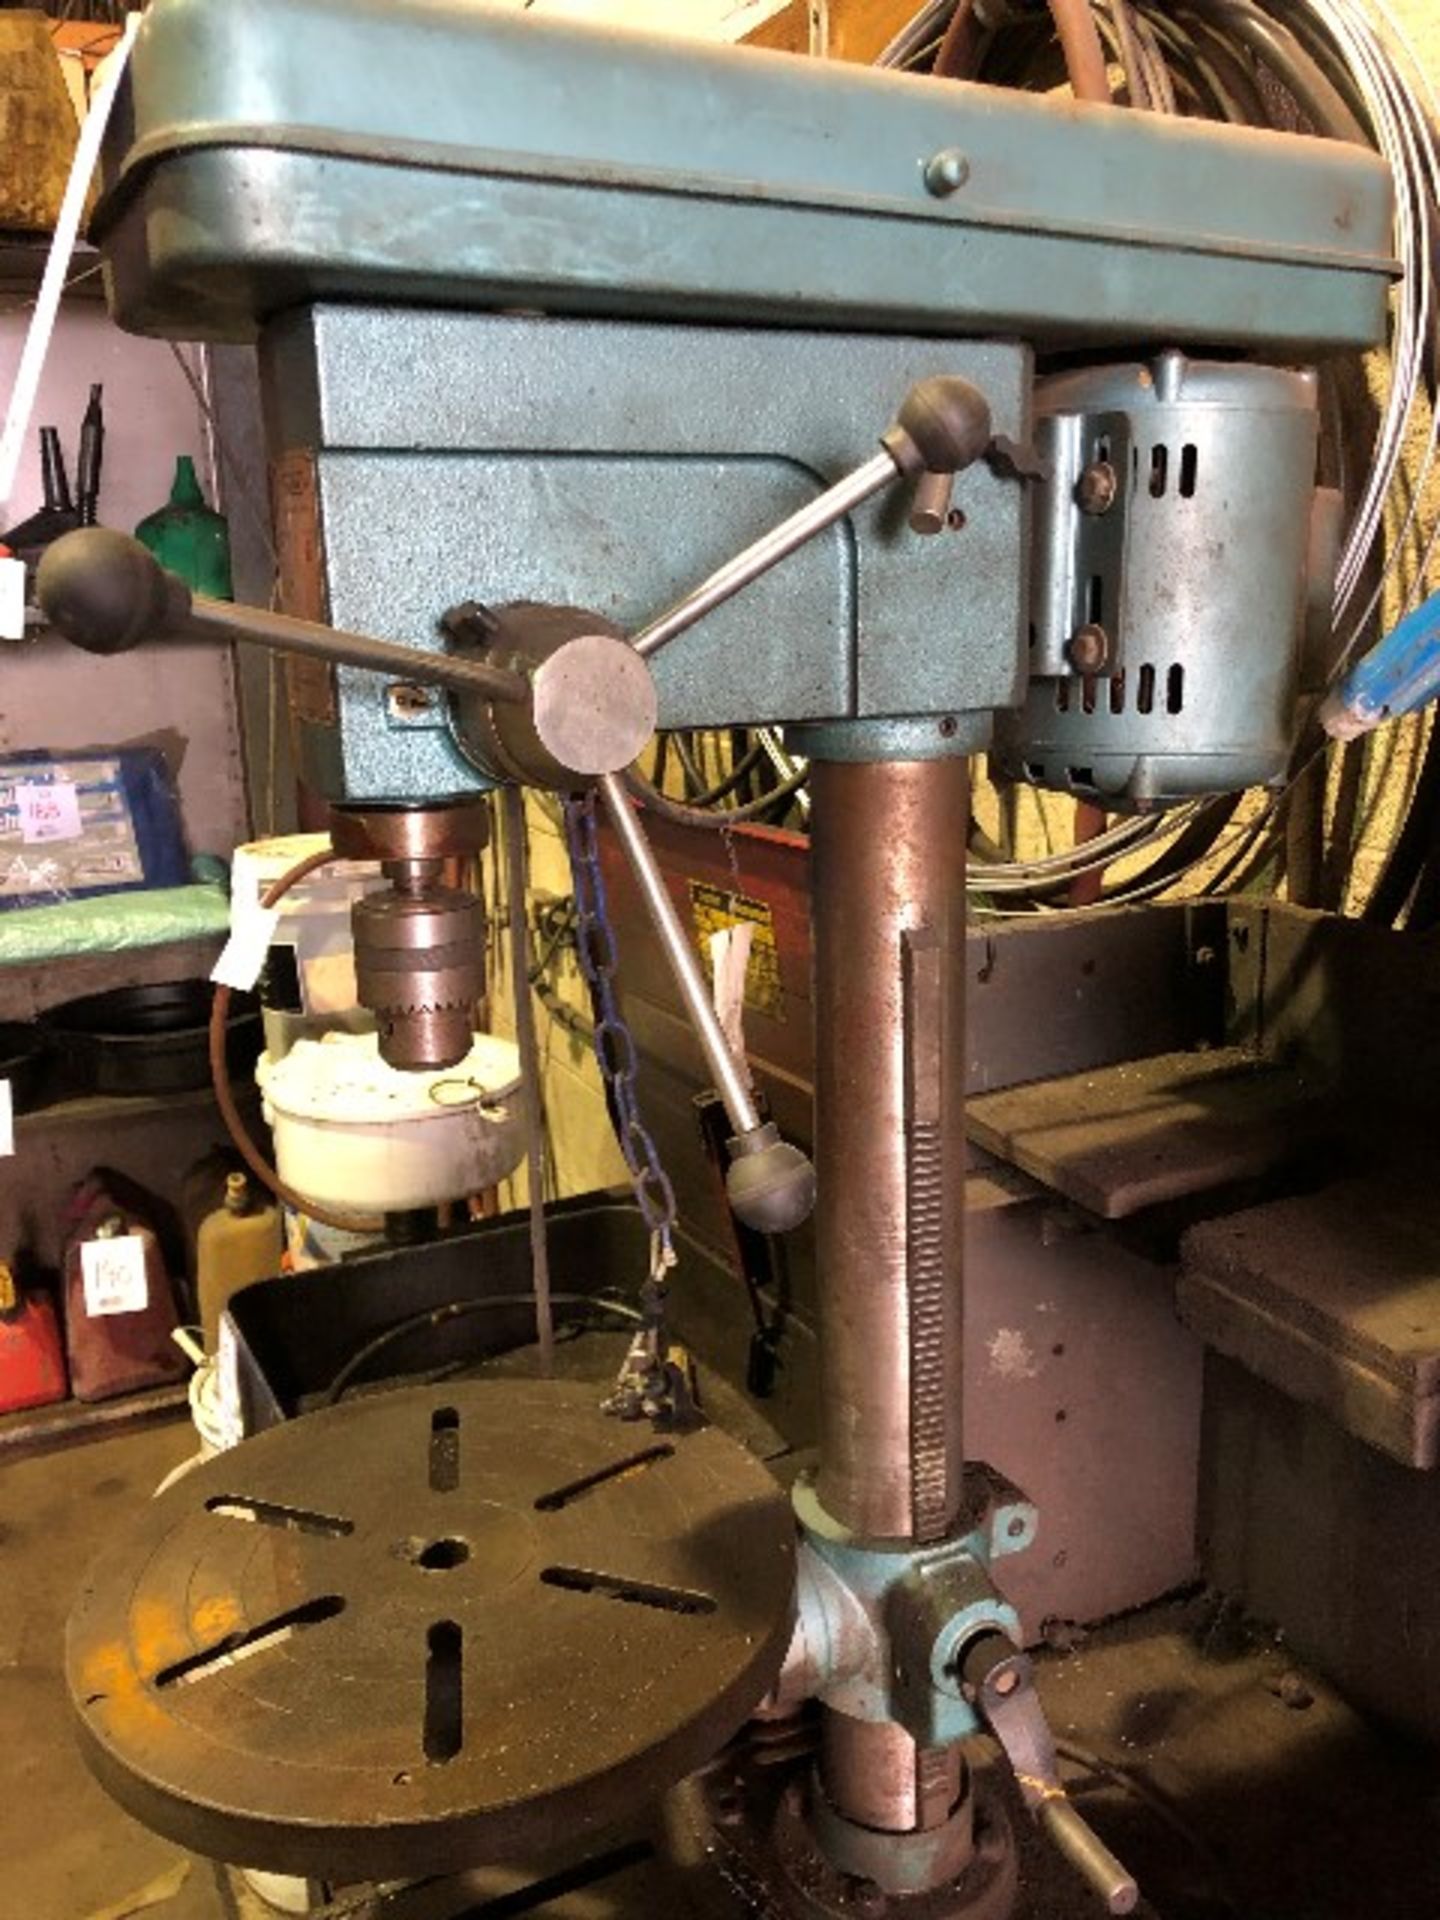 Busy Bee drill press, model:B842, 115V, 12A - Image 3 of 4